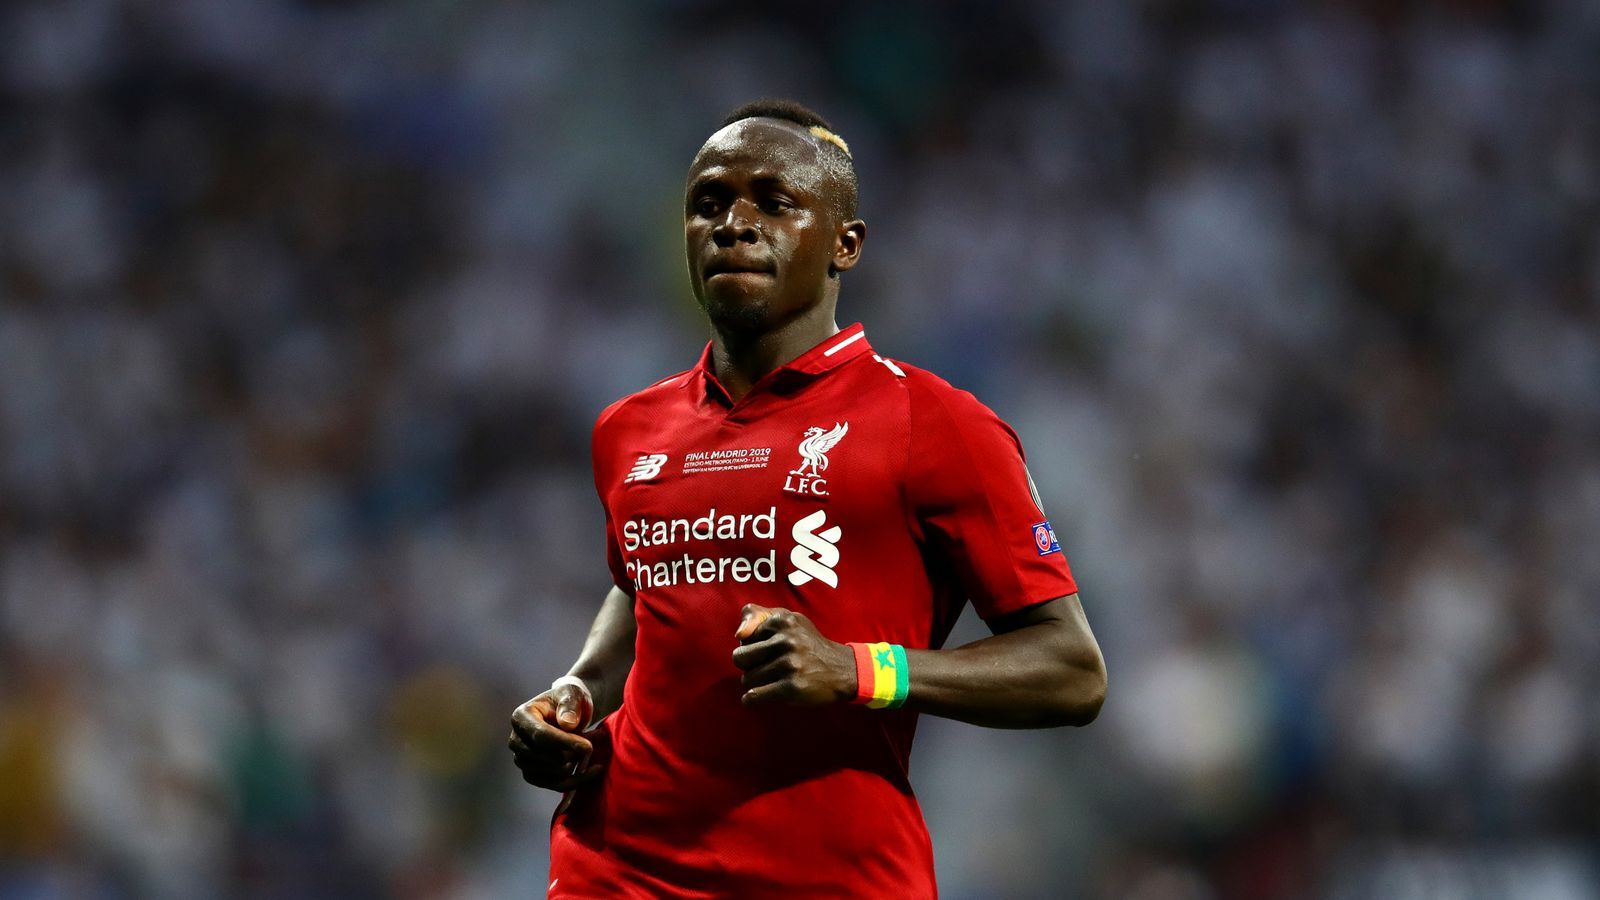 Giresse Believes That the 2019 Best FIFA Player Title Should Have Gone to Mane Instead of Messi